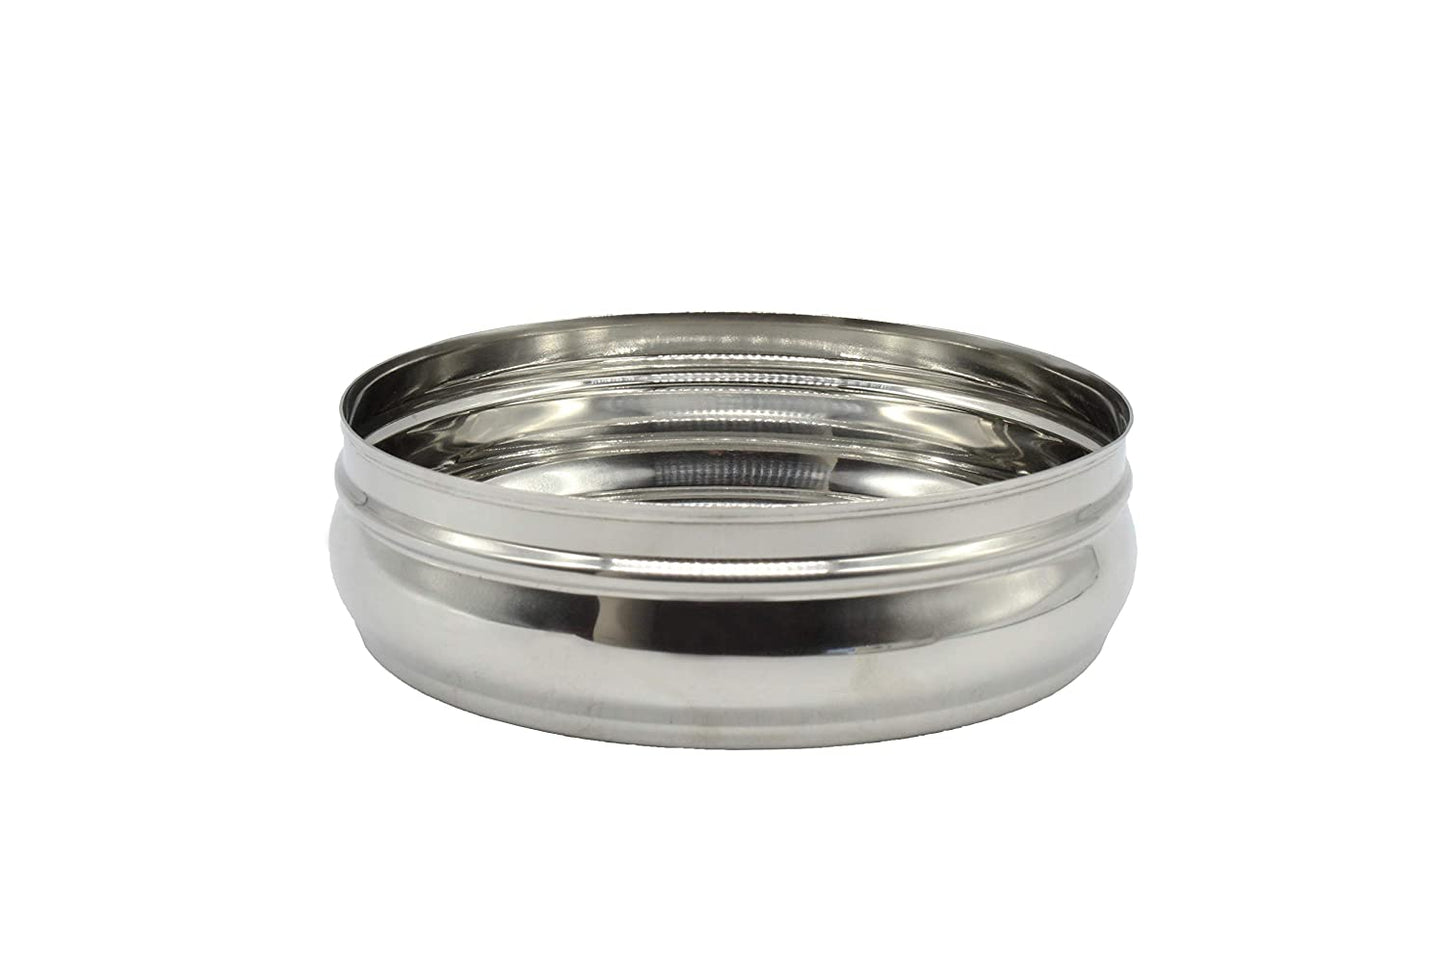 Stainless Steel See Through Lid Lunch Box | Dabba (14cm) 1200ml - Set of 2Pcs